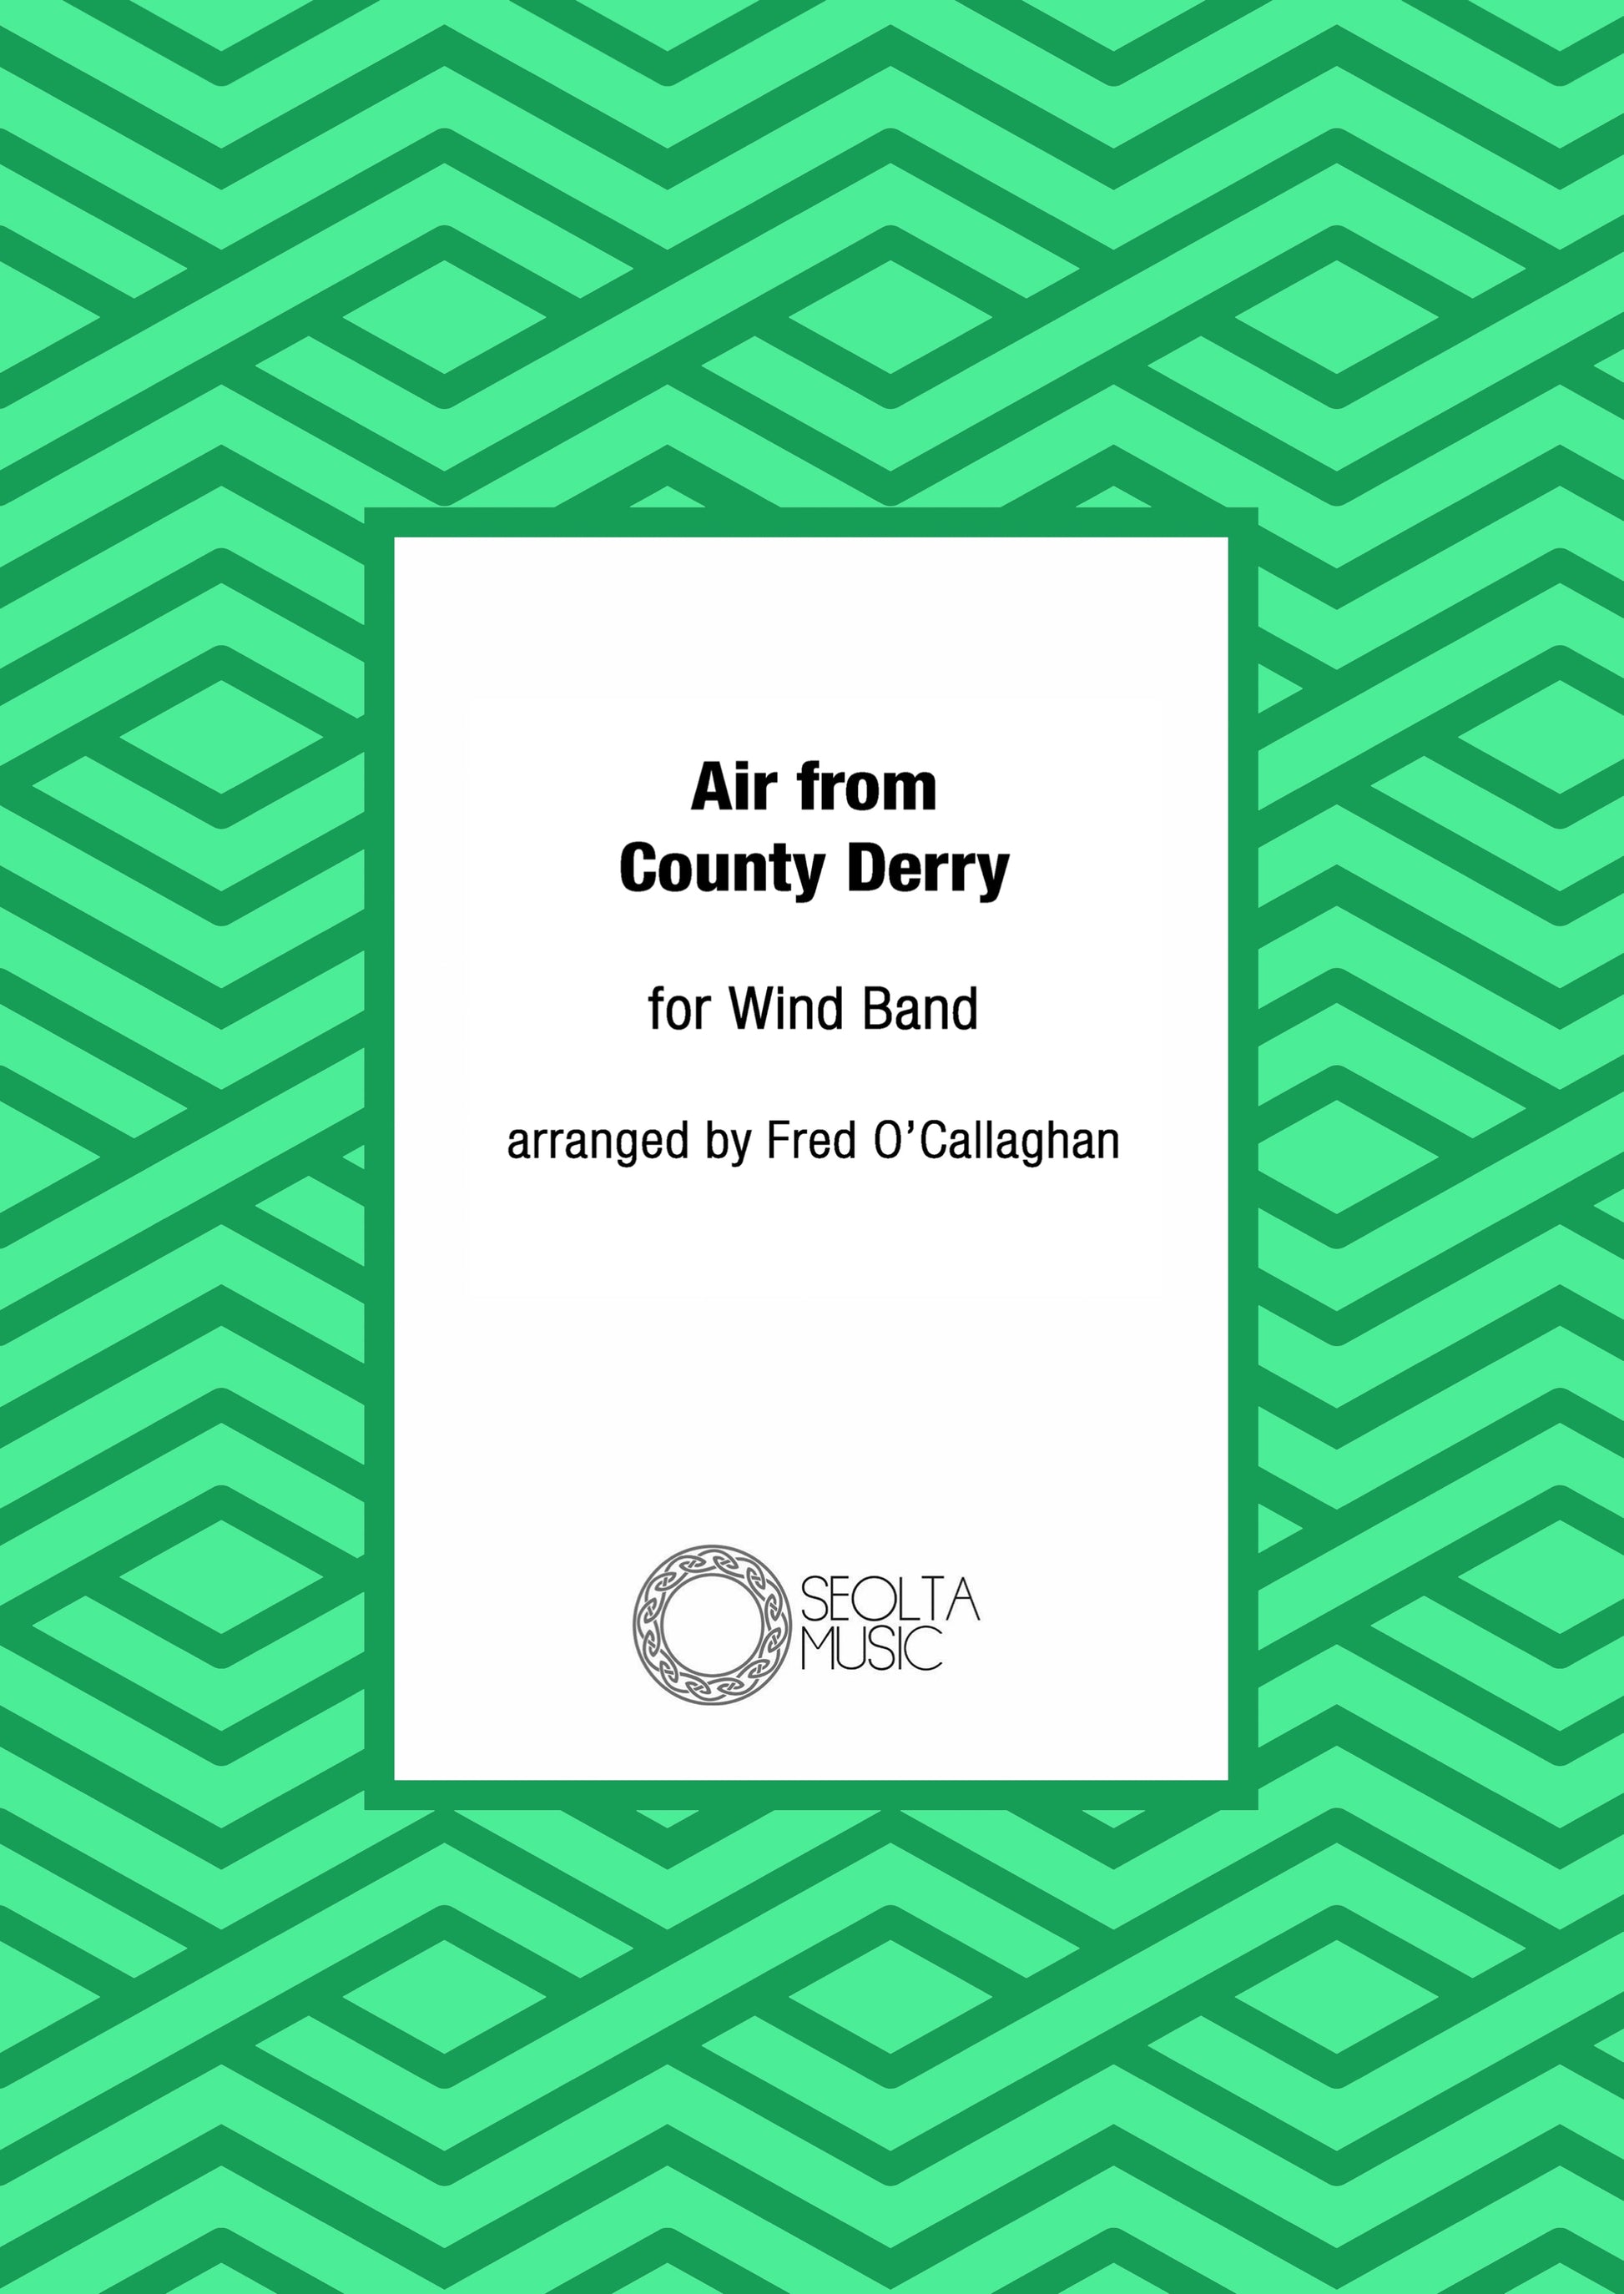 air-from-county-derry-danny-boy-wind-band-fred-o-callaghan-sheet-music